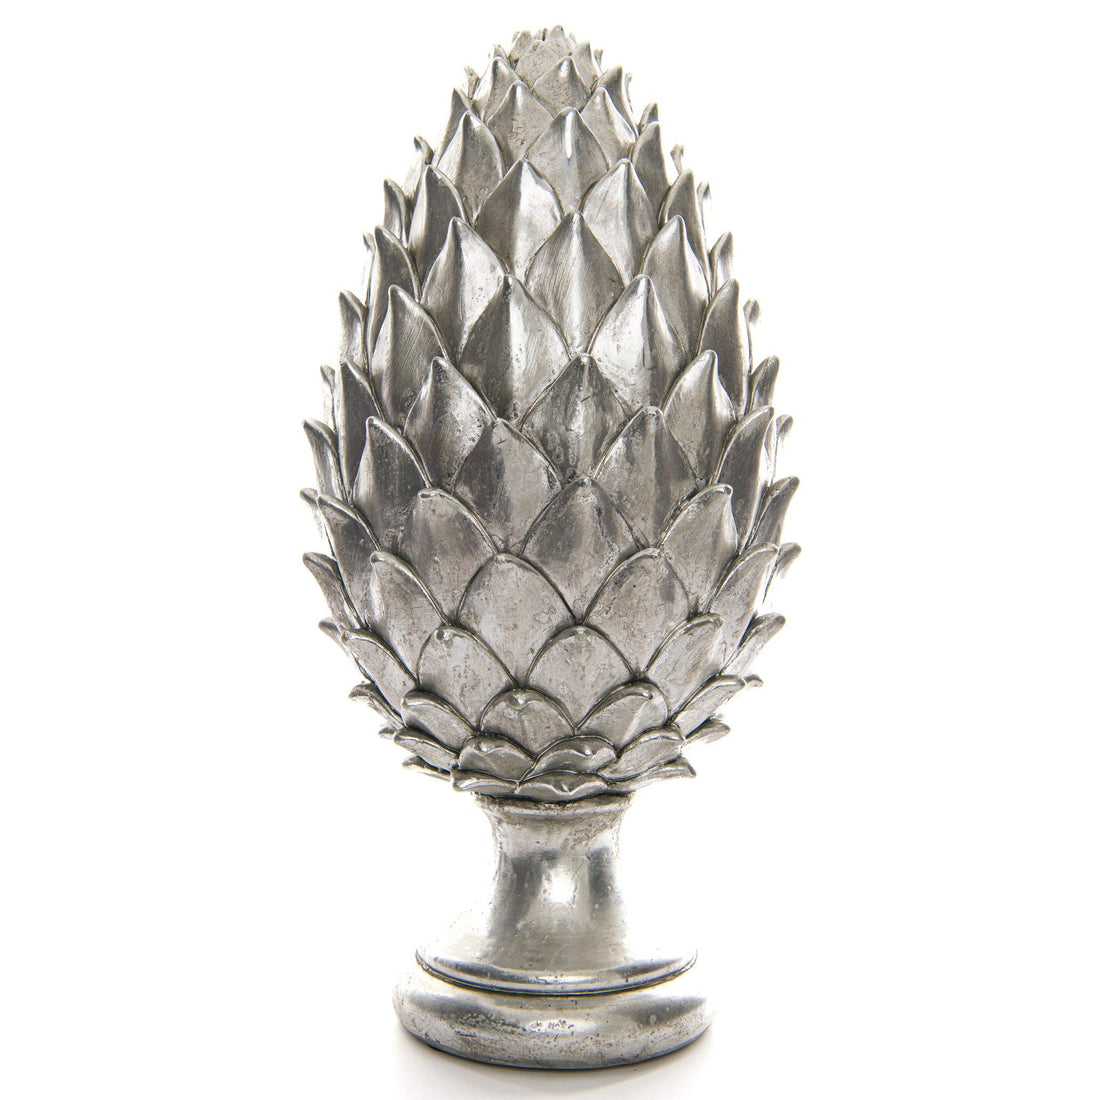 Tall Large Silver Pinecone Finial - £84.95 - Gifts & Accessories > Christmas Decorations > Ornaments 